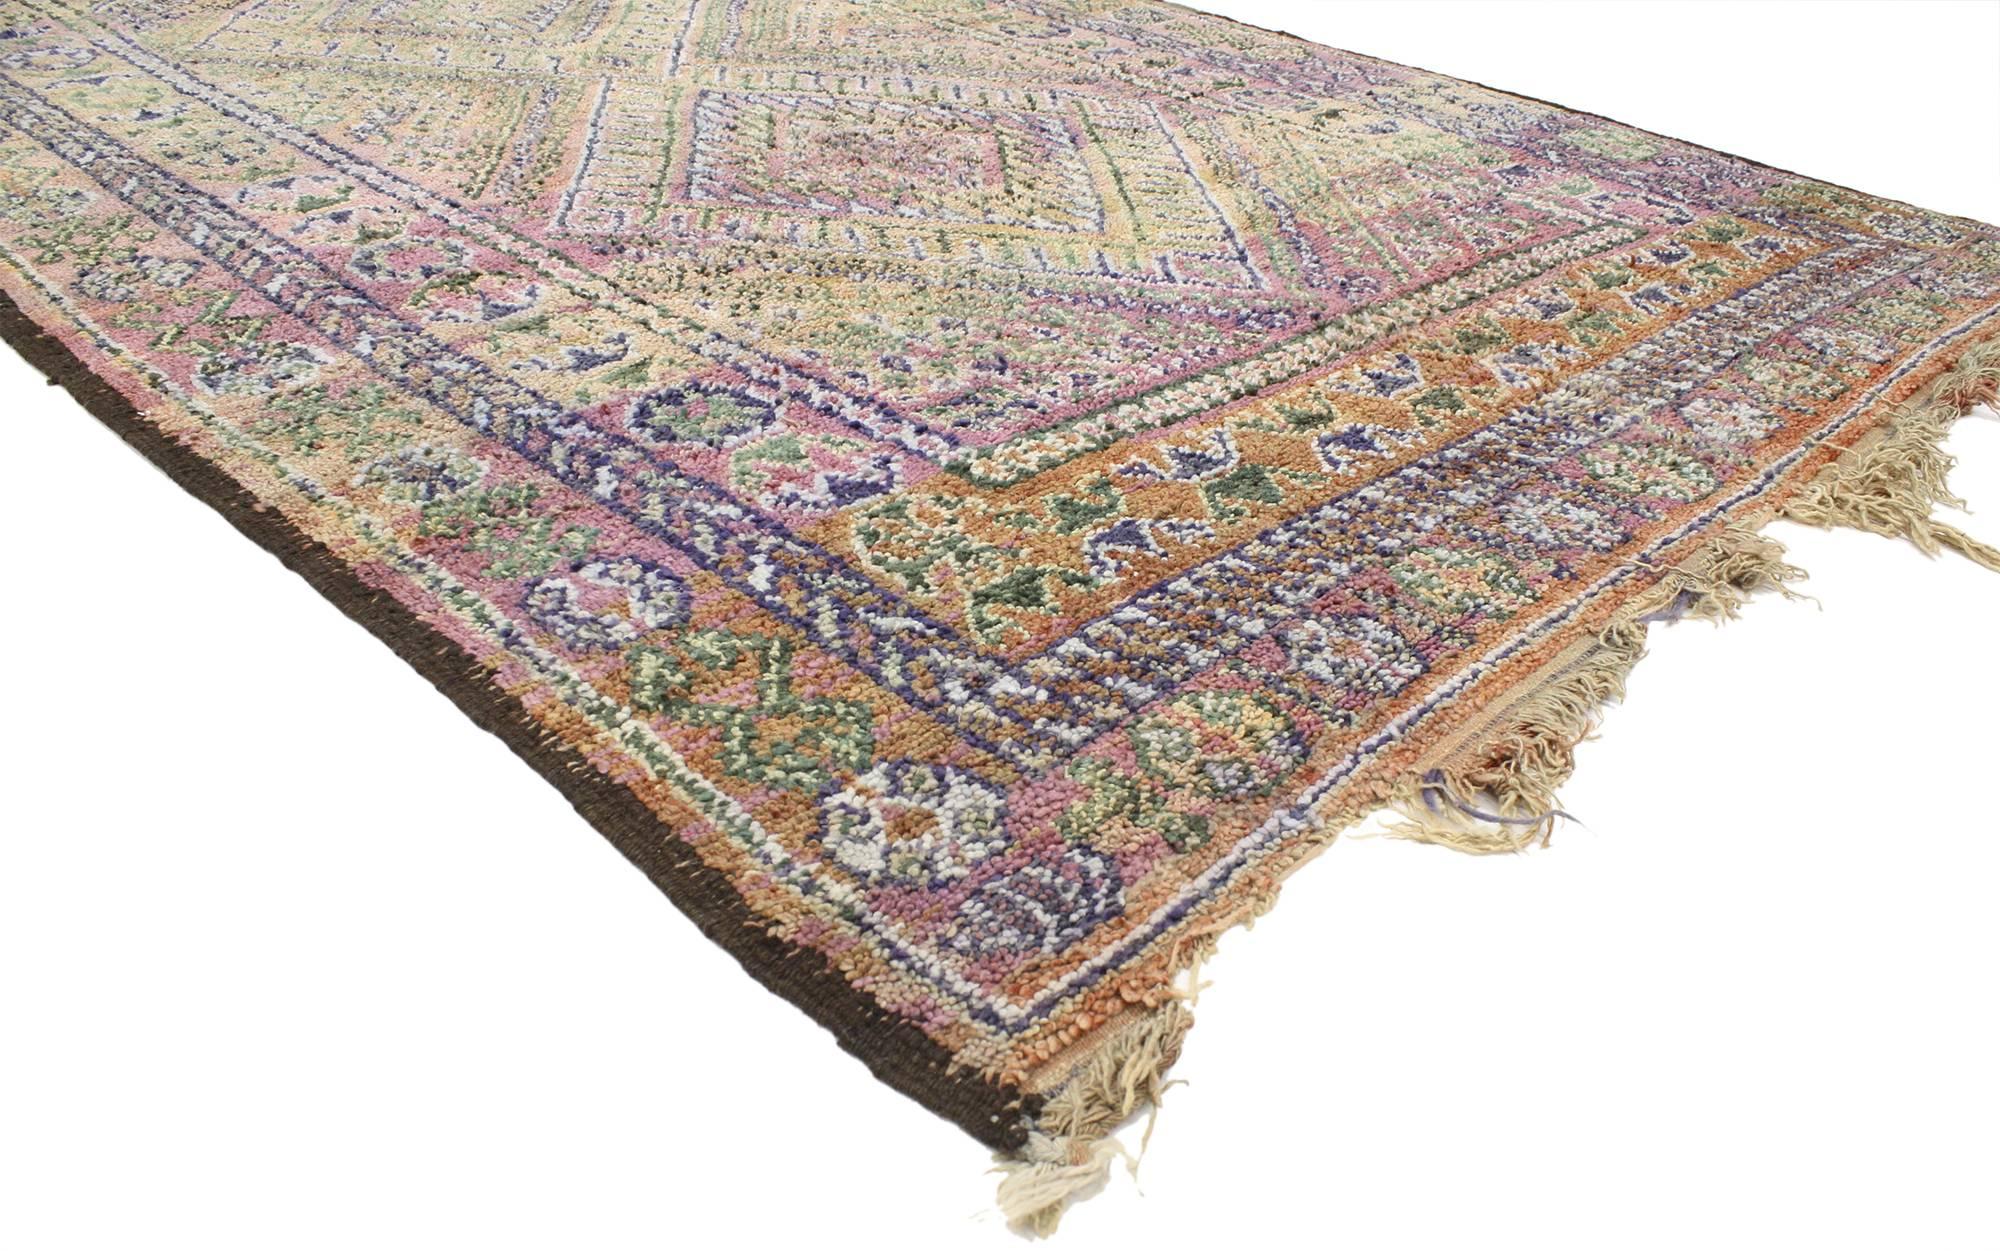 Hand-Knotted Vintage Berber Moroccan Rug with Modern Tribal Style, Amethyst